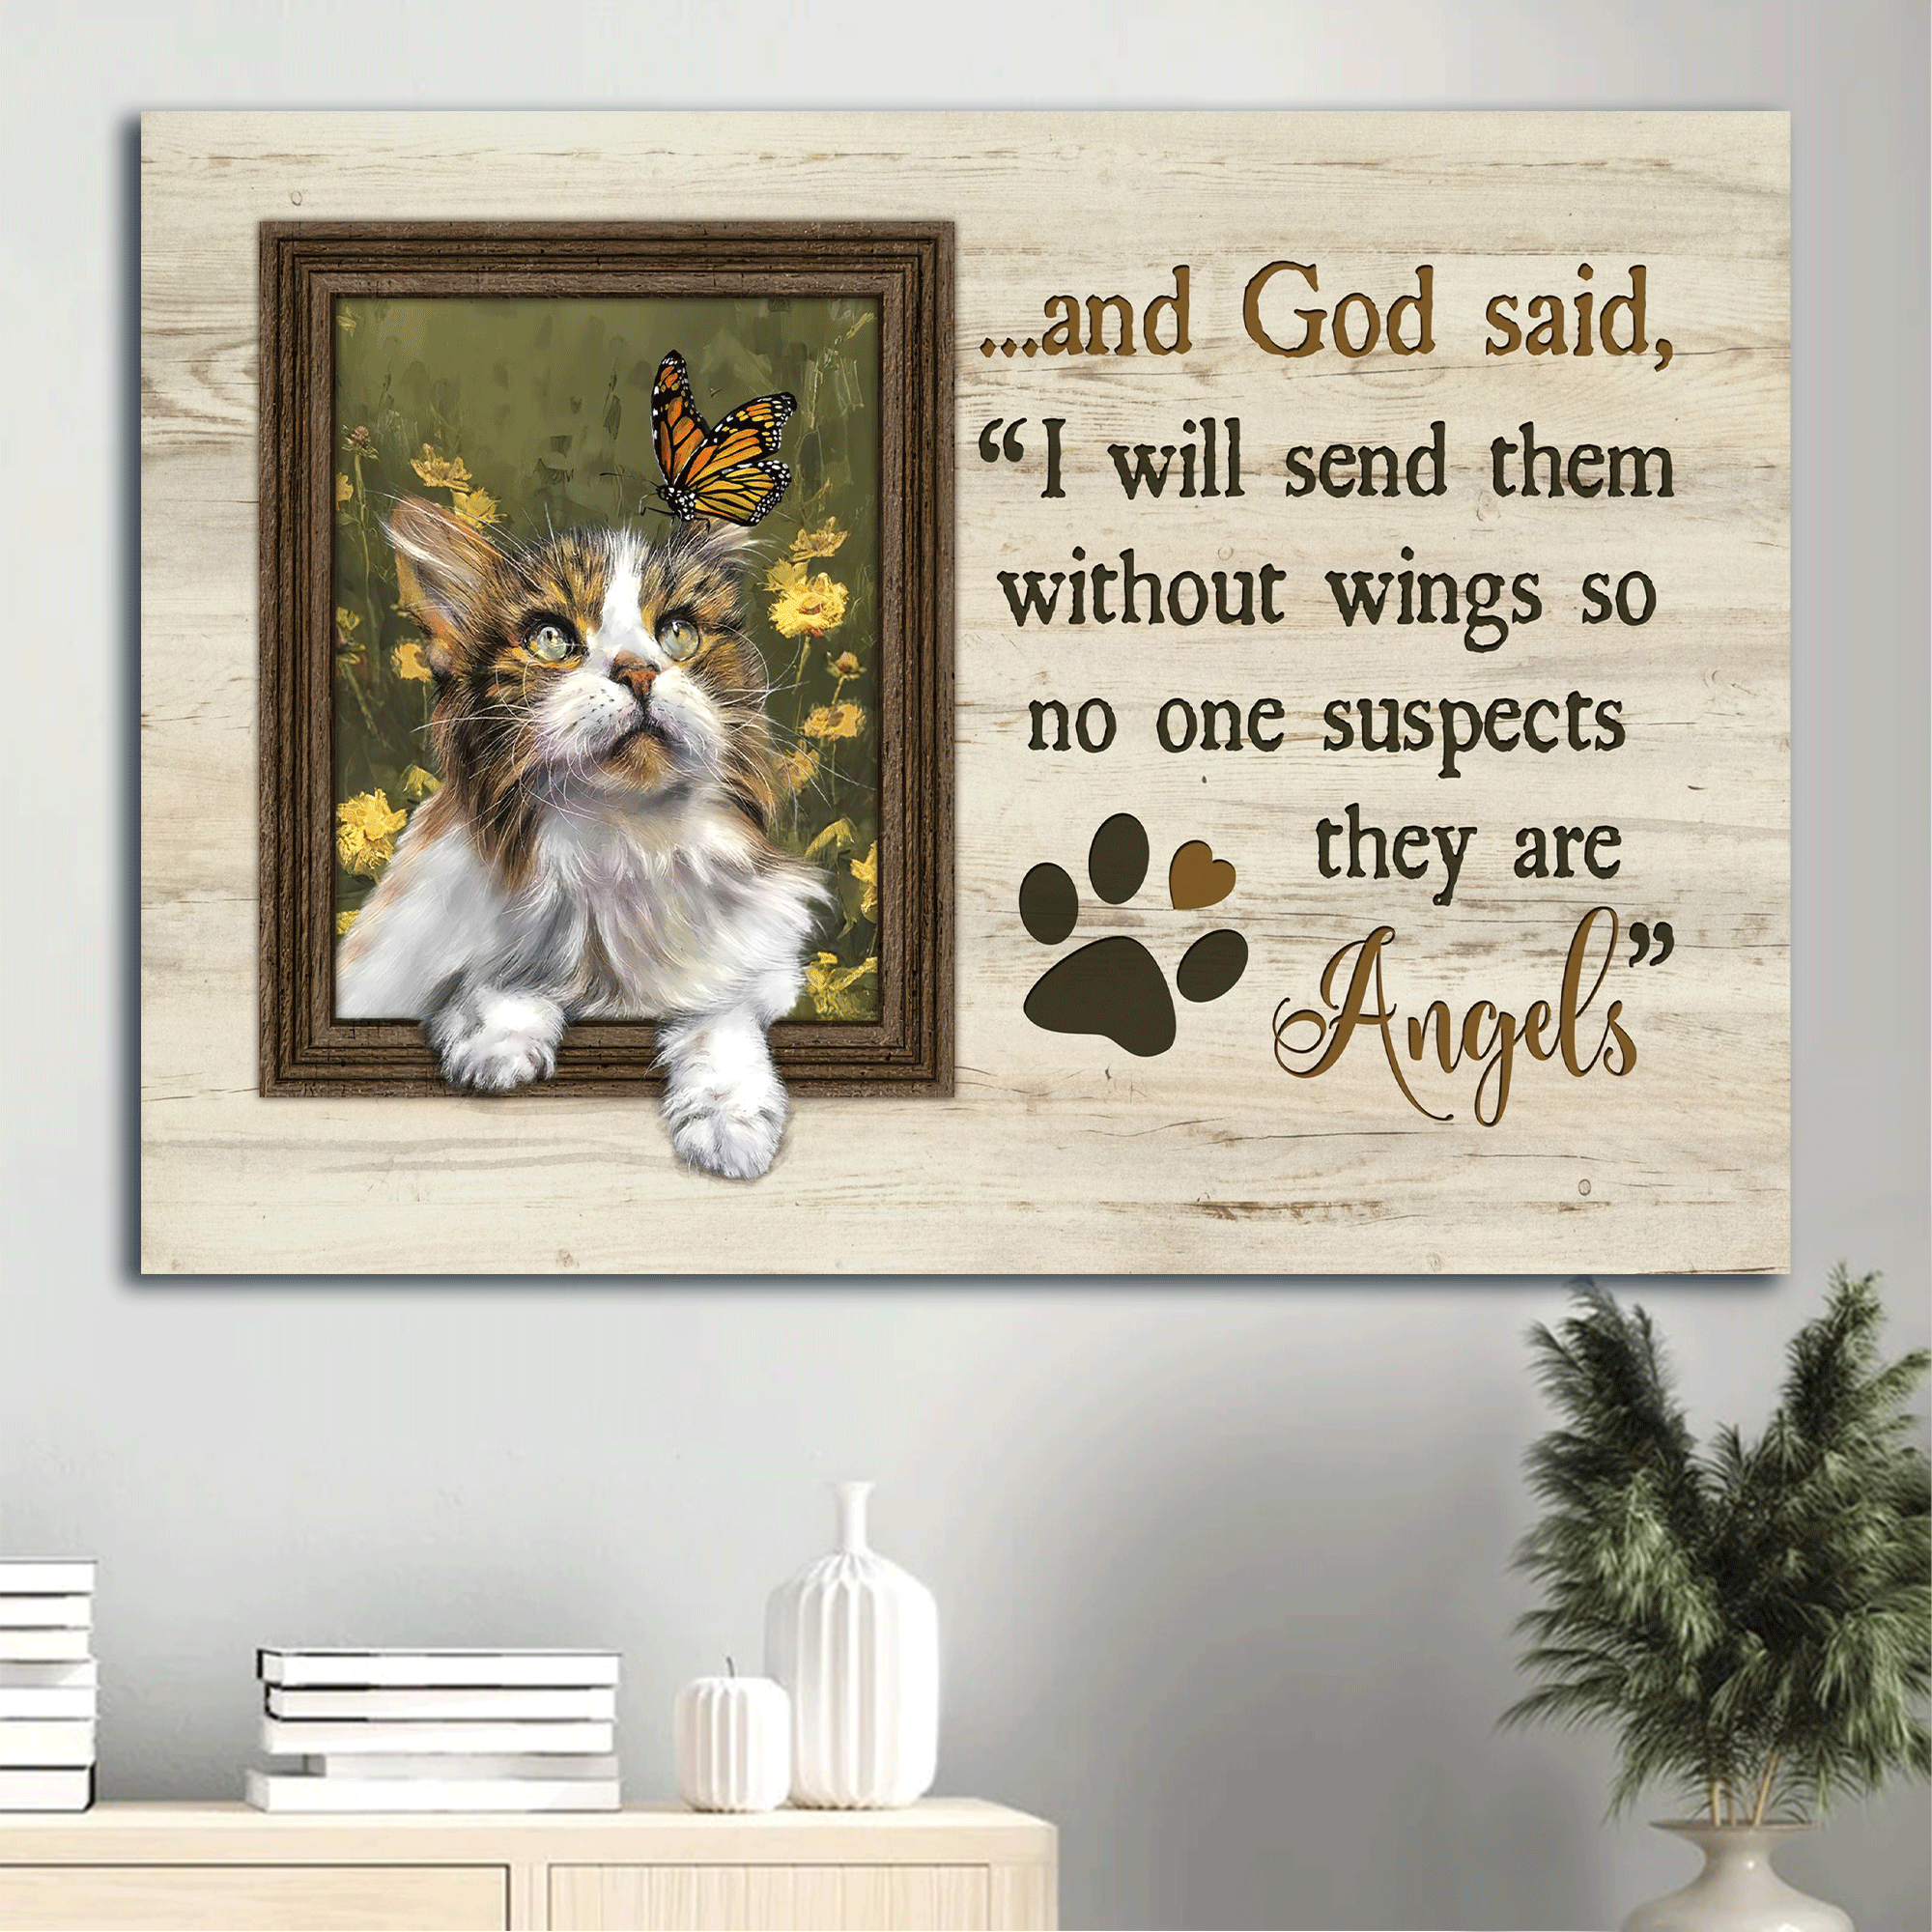 Jesus Landscape Canvas - Pretty cat, Yellow flower field, Small window Canvas - Gift for Christian, Pet lovers - I will send them without wings Landscape Canvas